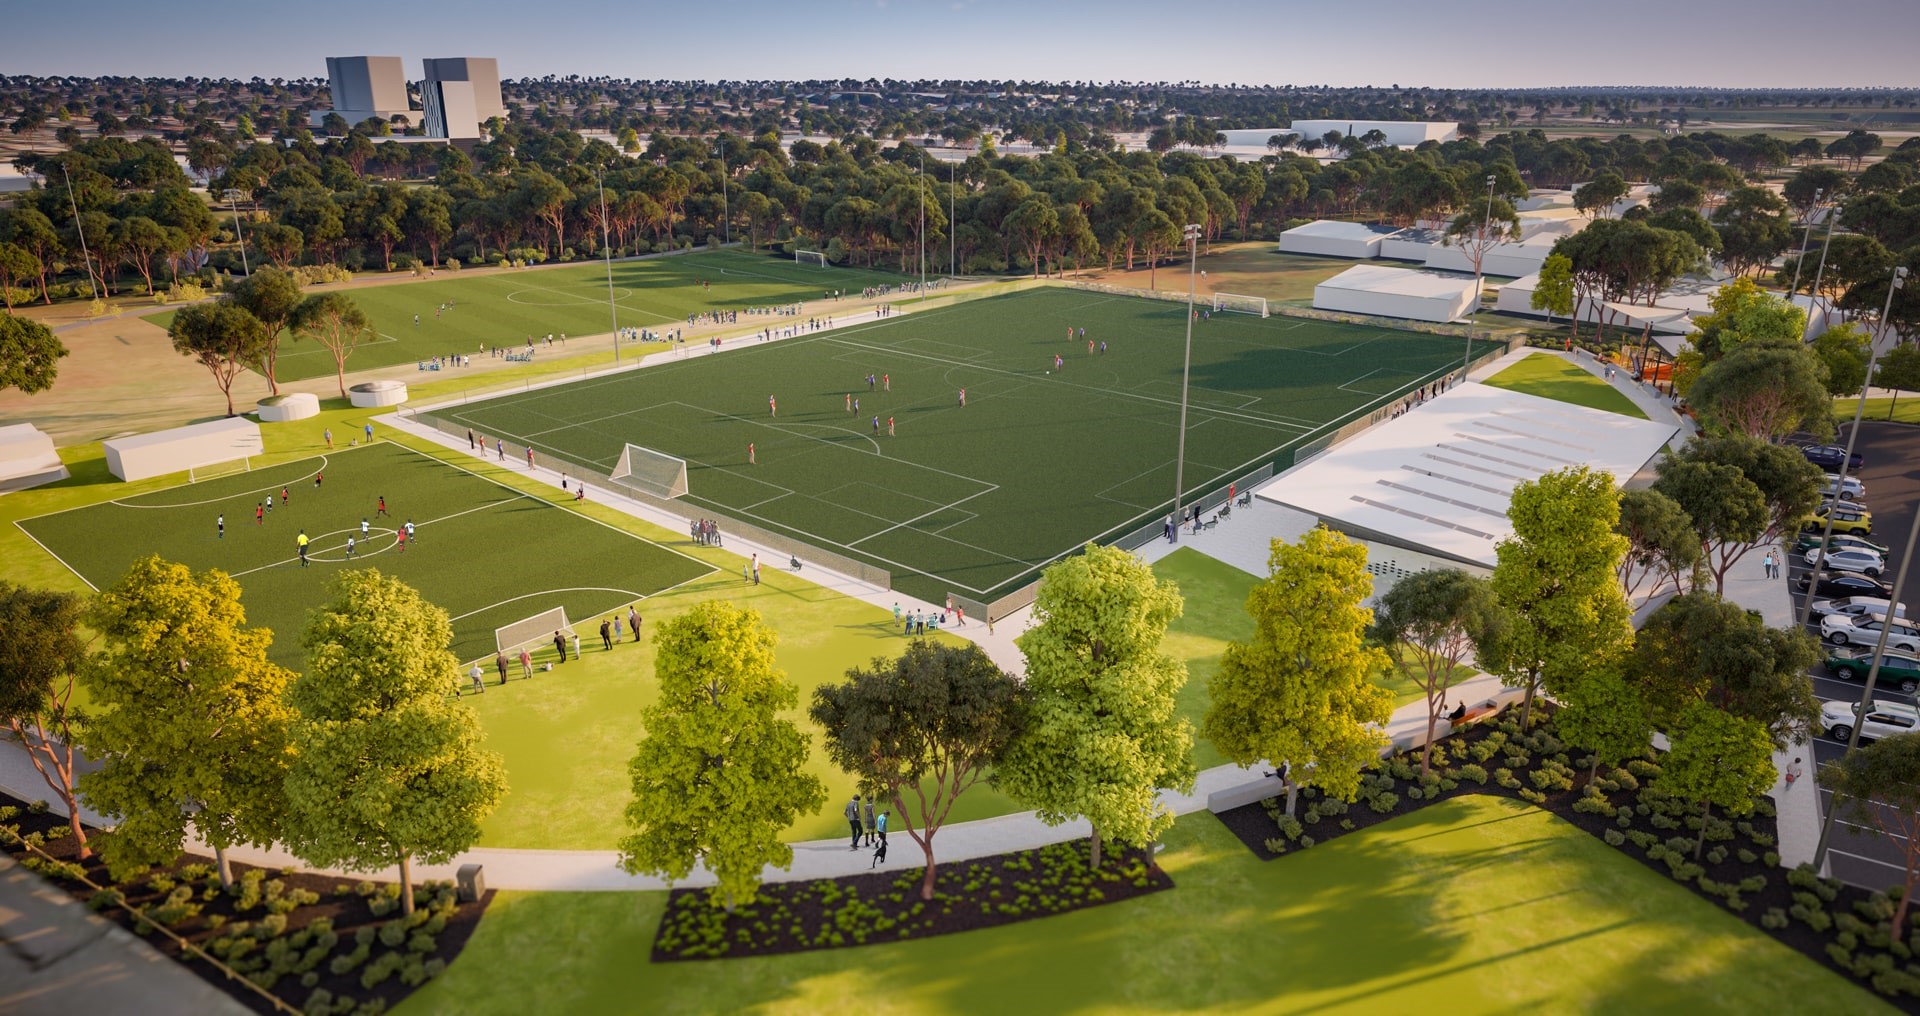 Artists impression of the precinct with one large sports field surrounded by trees and parkland